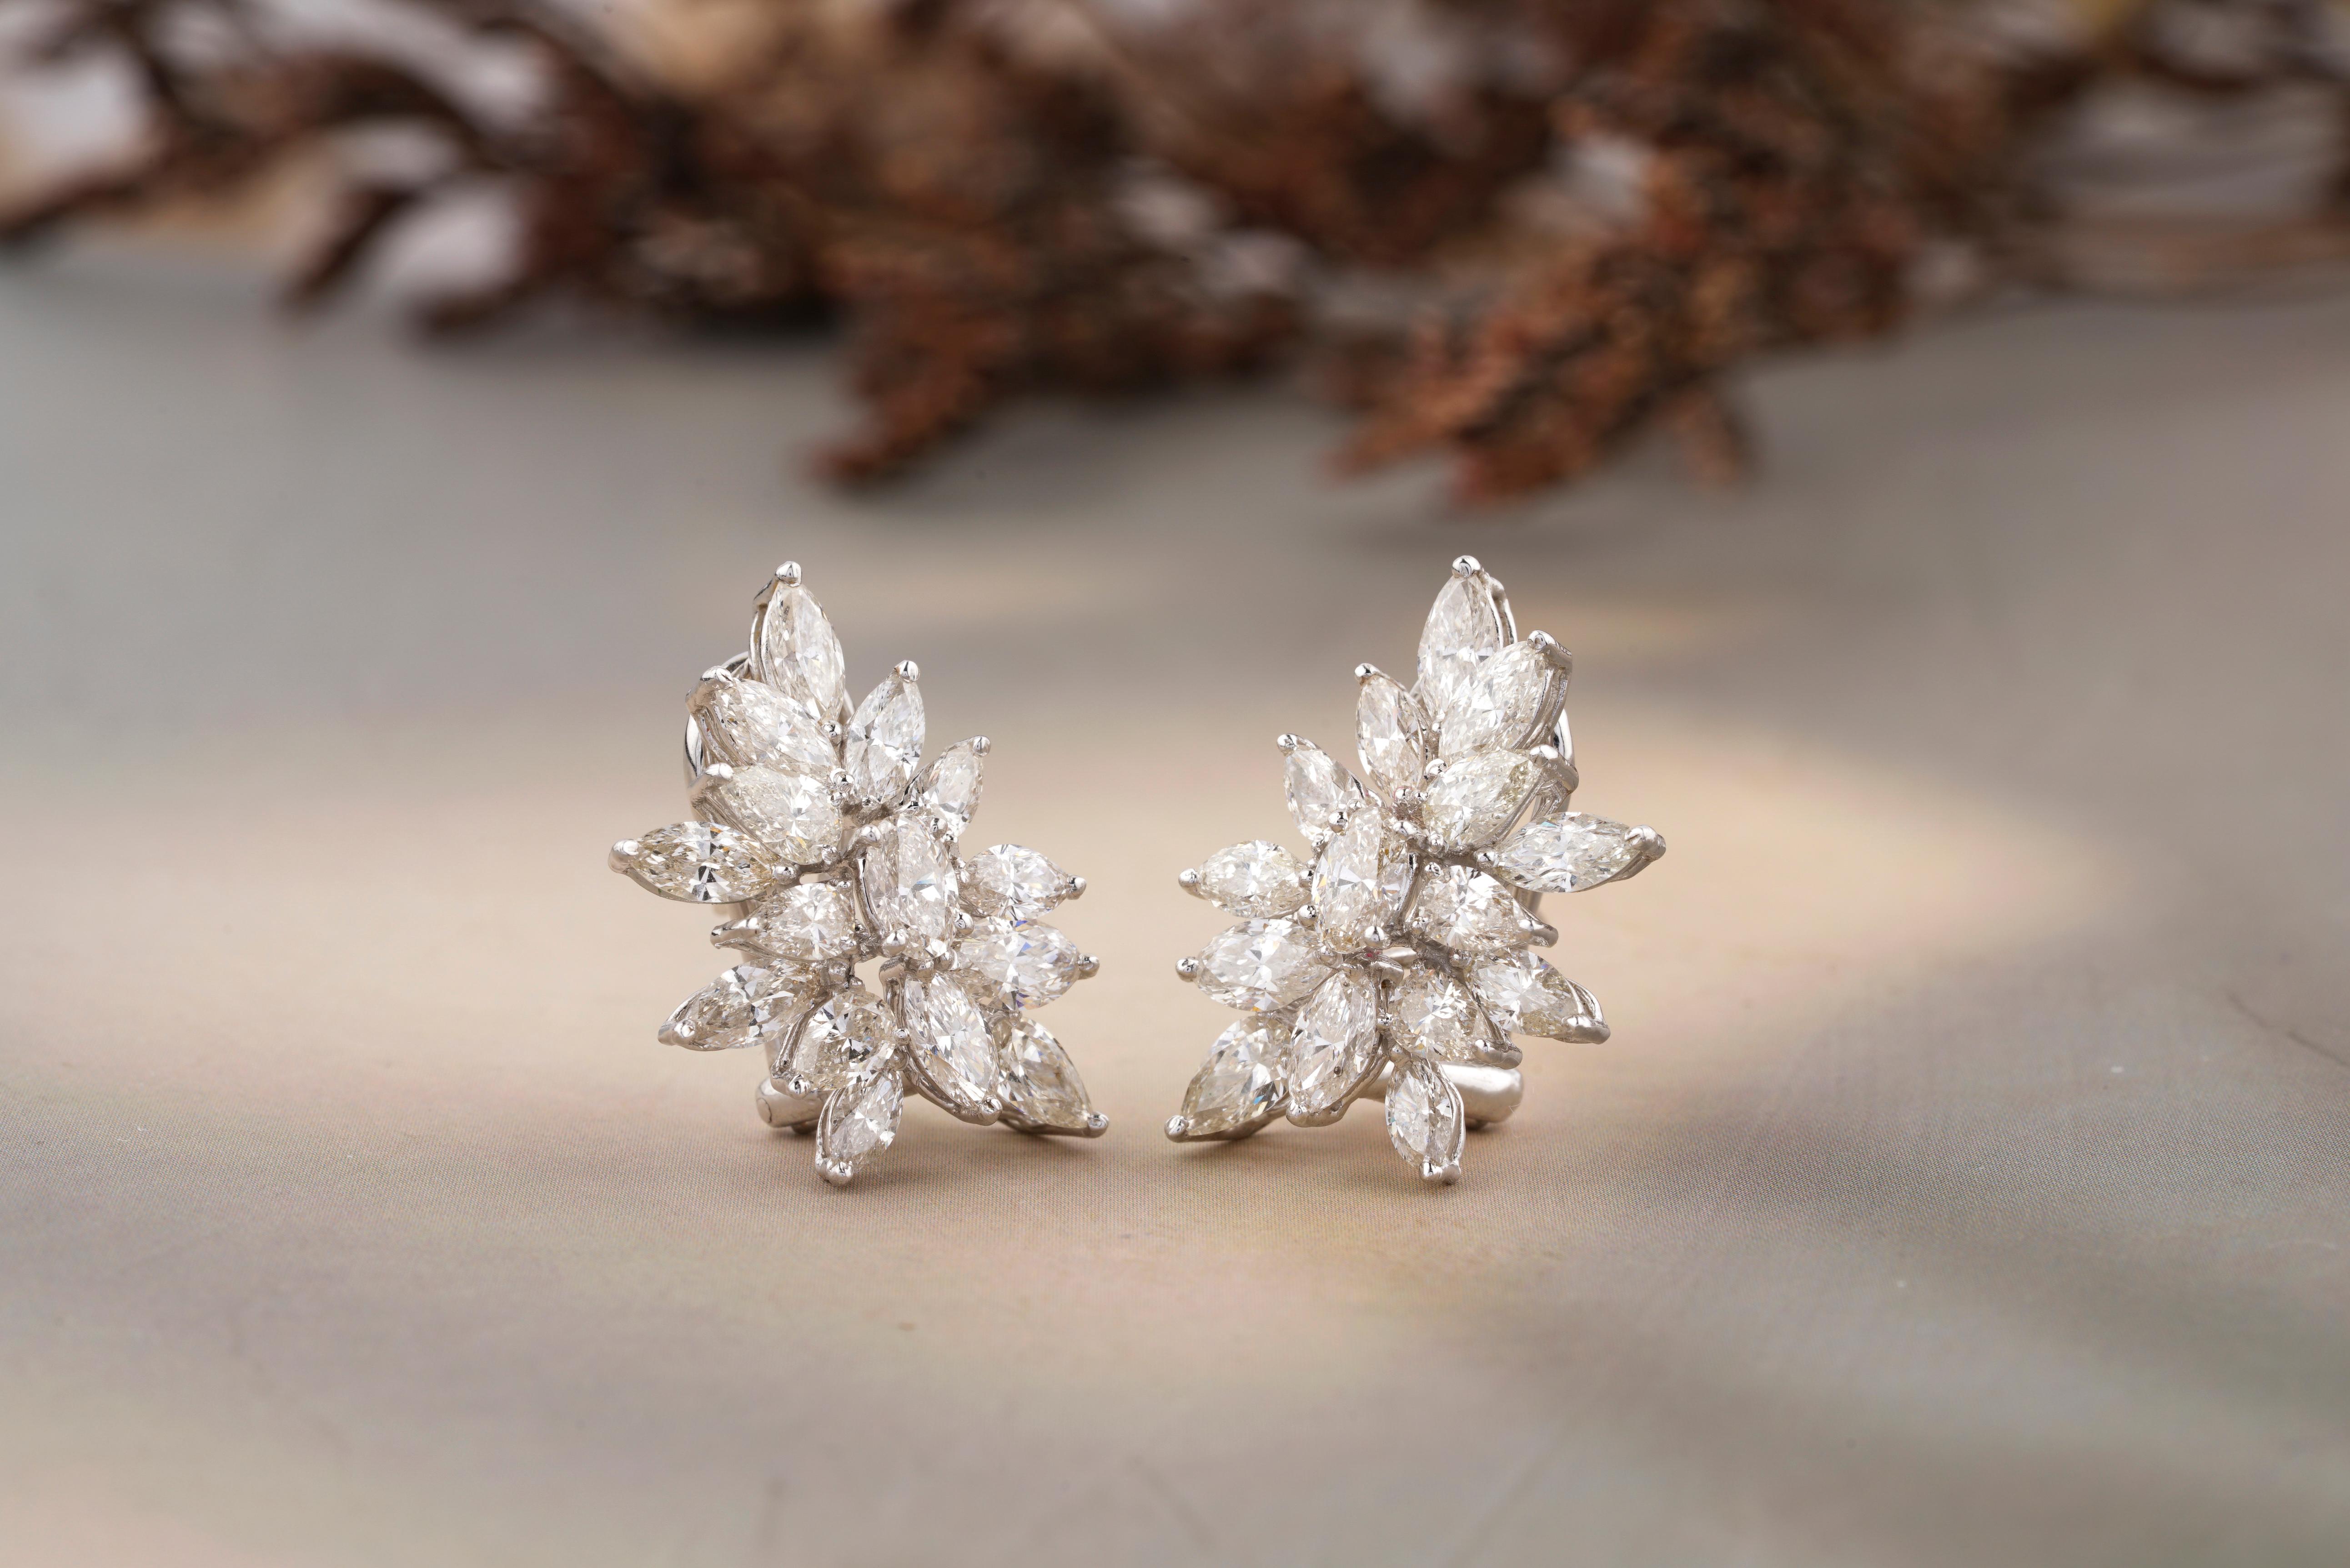 The Marquise Natural Diamonds with Detachable Pearls Earrings are a stunning piece of jewelry made from 18K solid gold. The earrings feature marquise-cut natural diamonds, which are known for their elongated shape and elegant sparkle. The diamonds